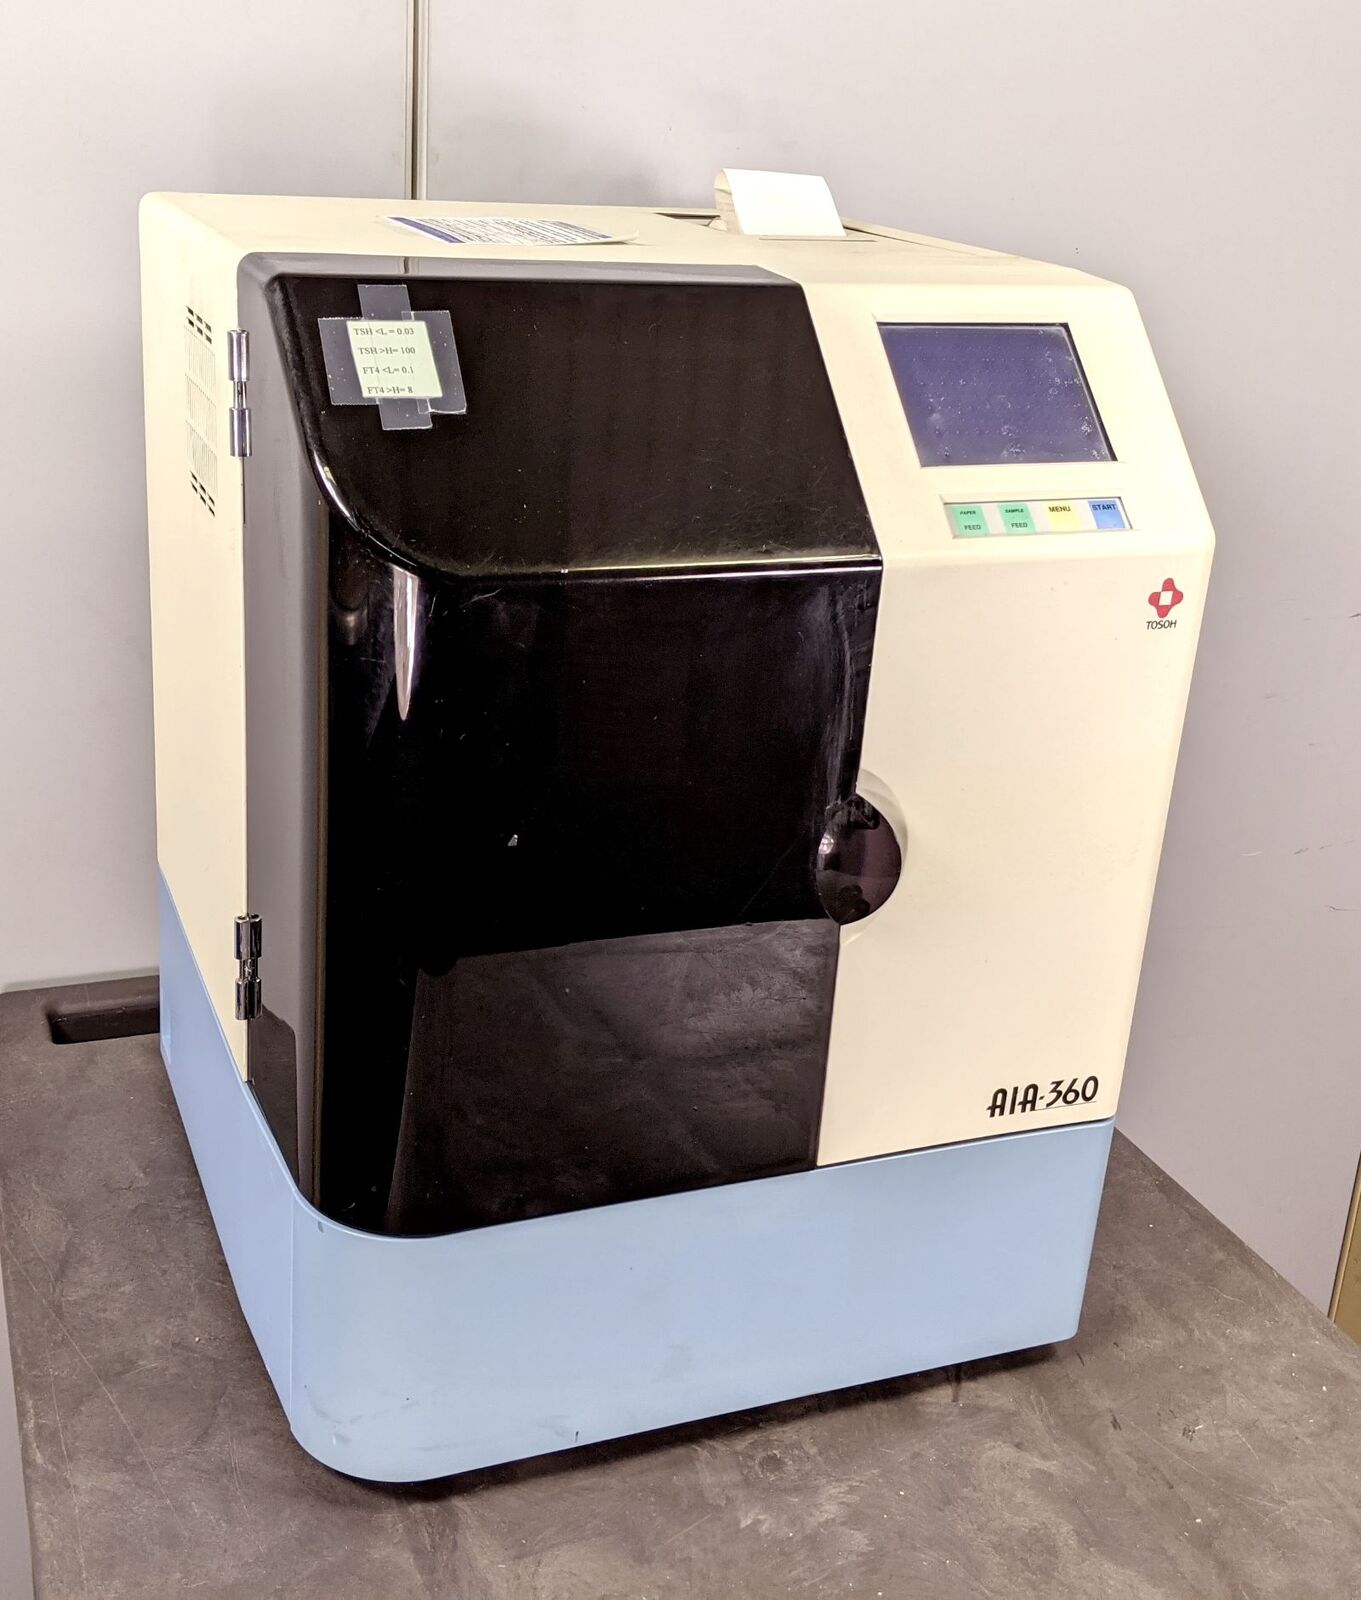 Tosoh AIA 360 Automated Enzyme Immunoassay Analyzer for sale online | eBay